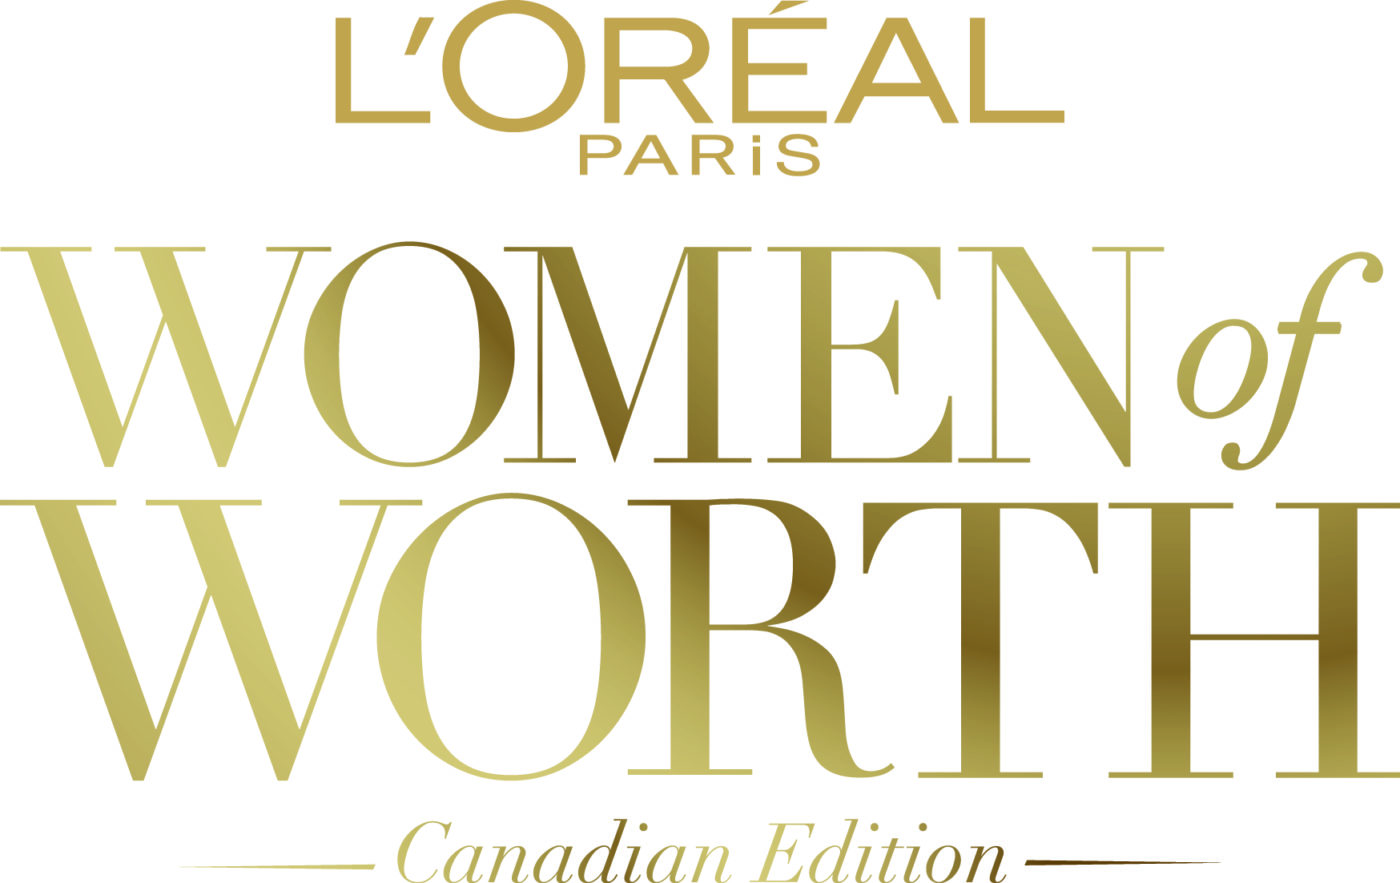 L'Oréal Paris Women Of Worth Awards 2021: Mental Health Activist Simryn Atwal Tells Us Why She Needed To 'Bridge The Gap' To Connect Youth & Seniors To The Right Services